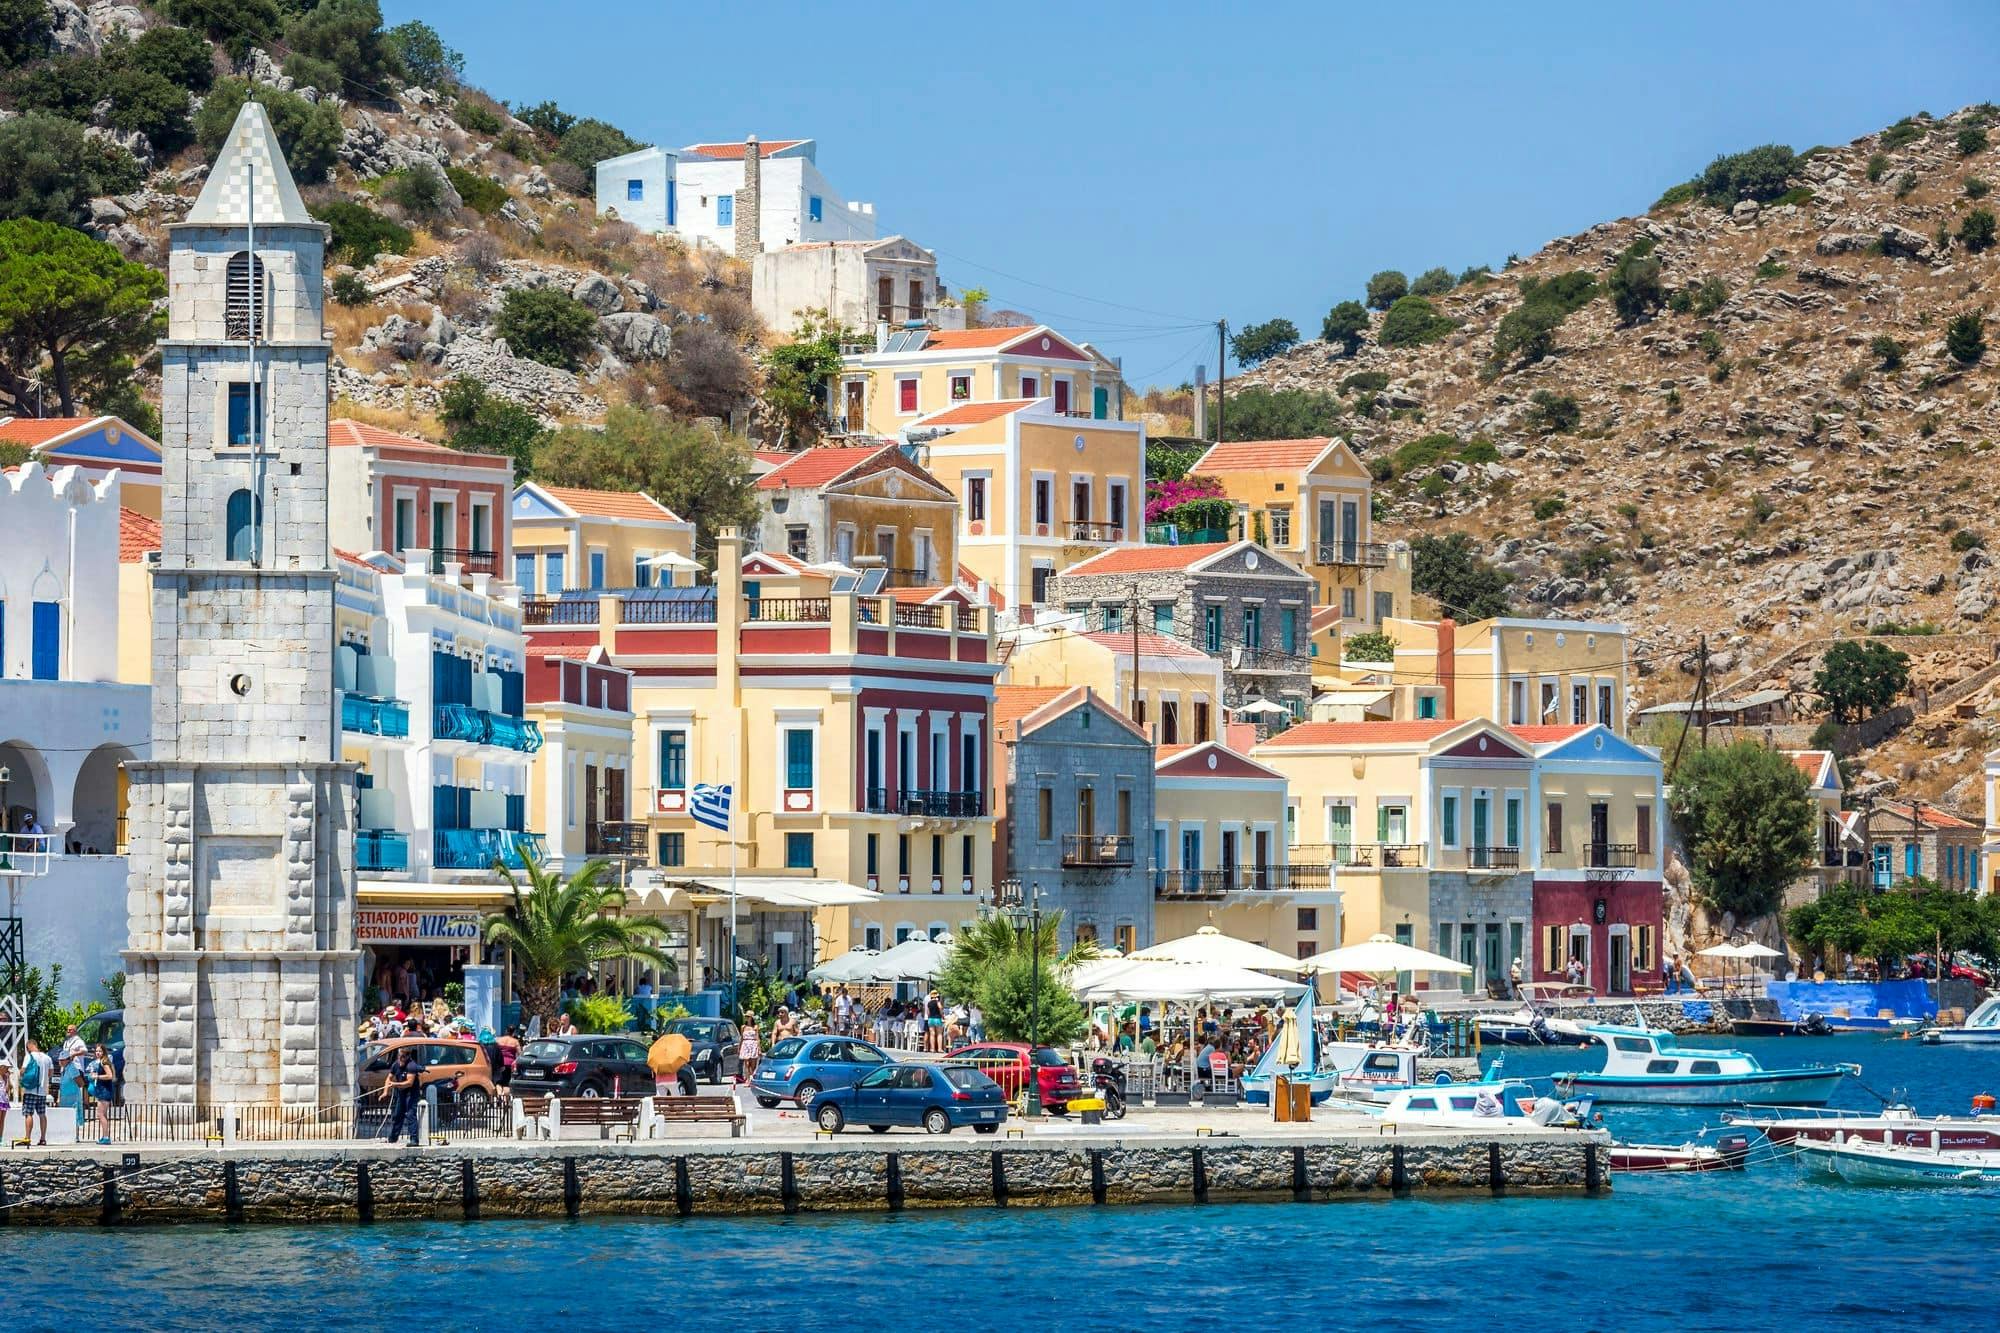 Full day Symi Tour including Panormitis Monastery